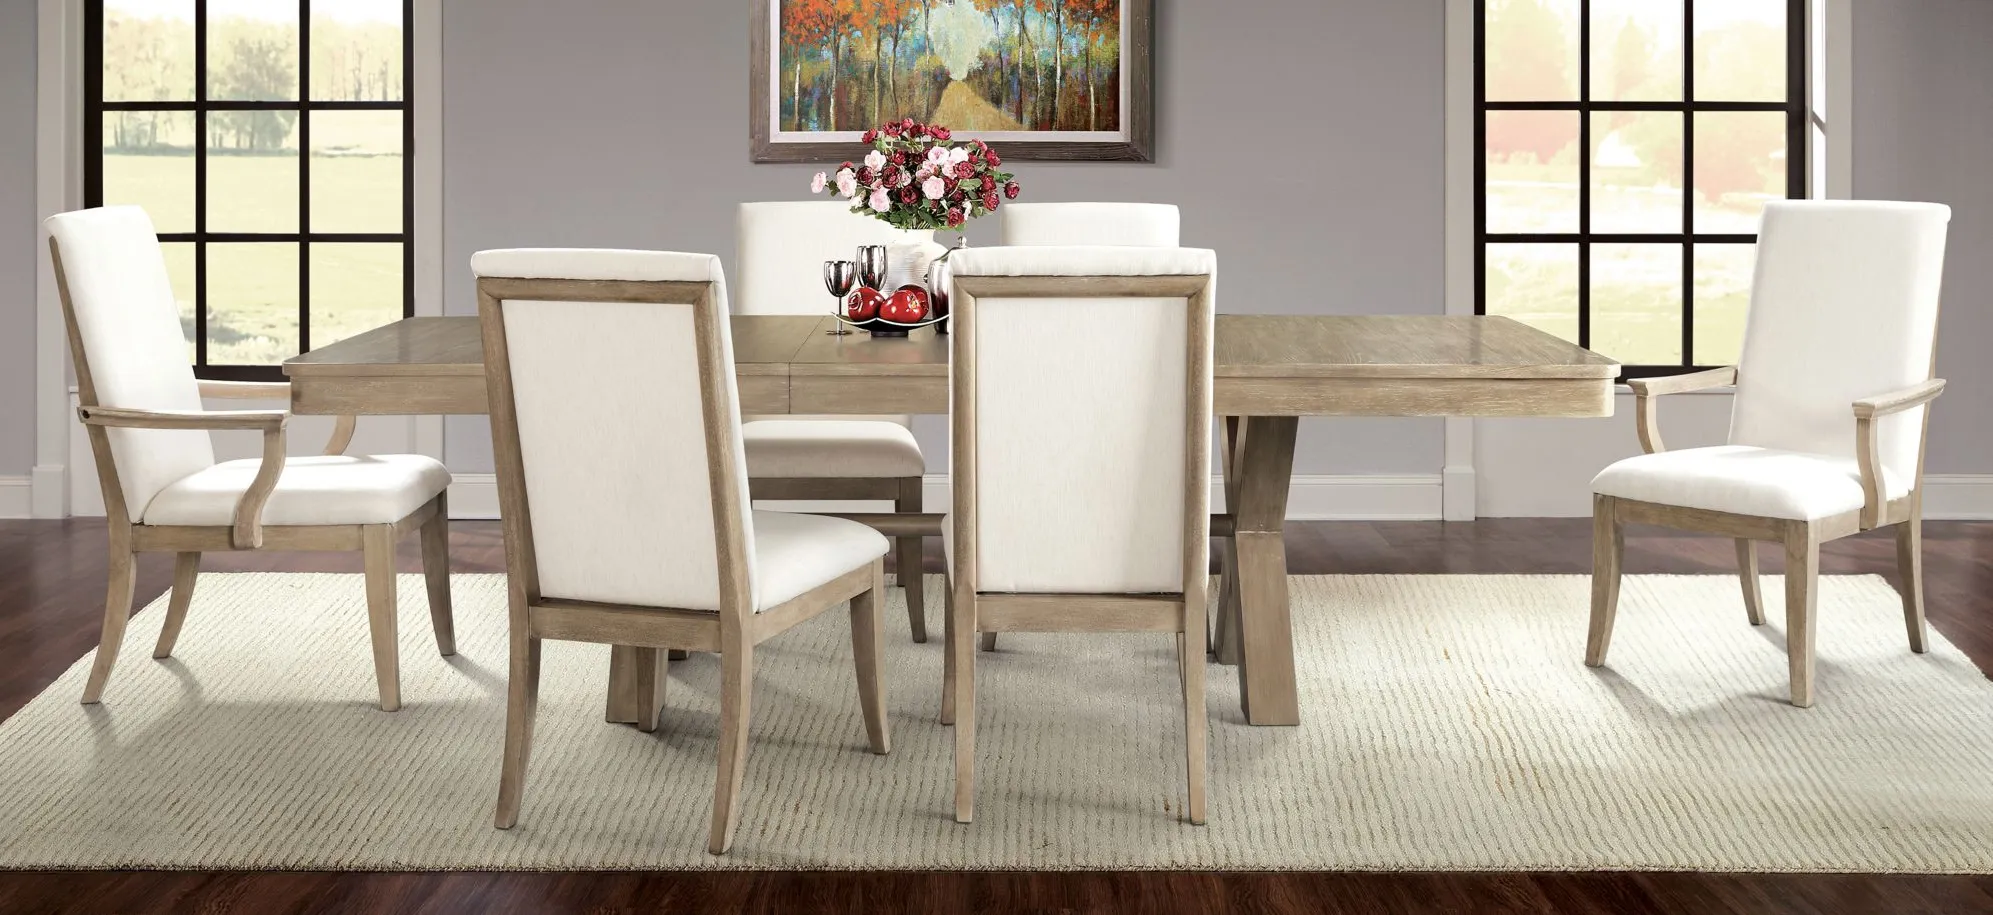 Torrin 7-pc. Dining Set w/ Upholstered Chairs in Natural by Riverside Furniture